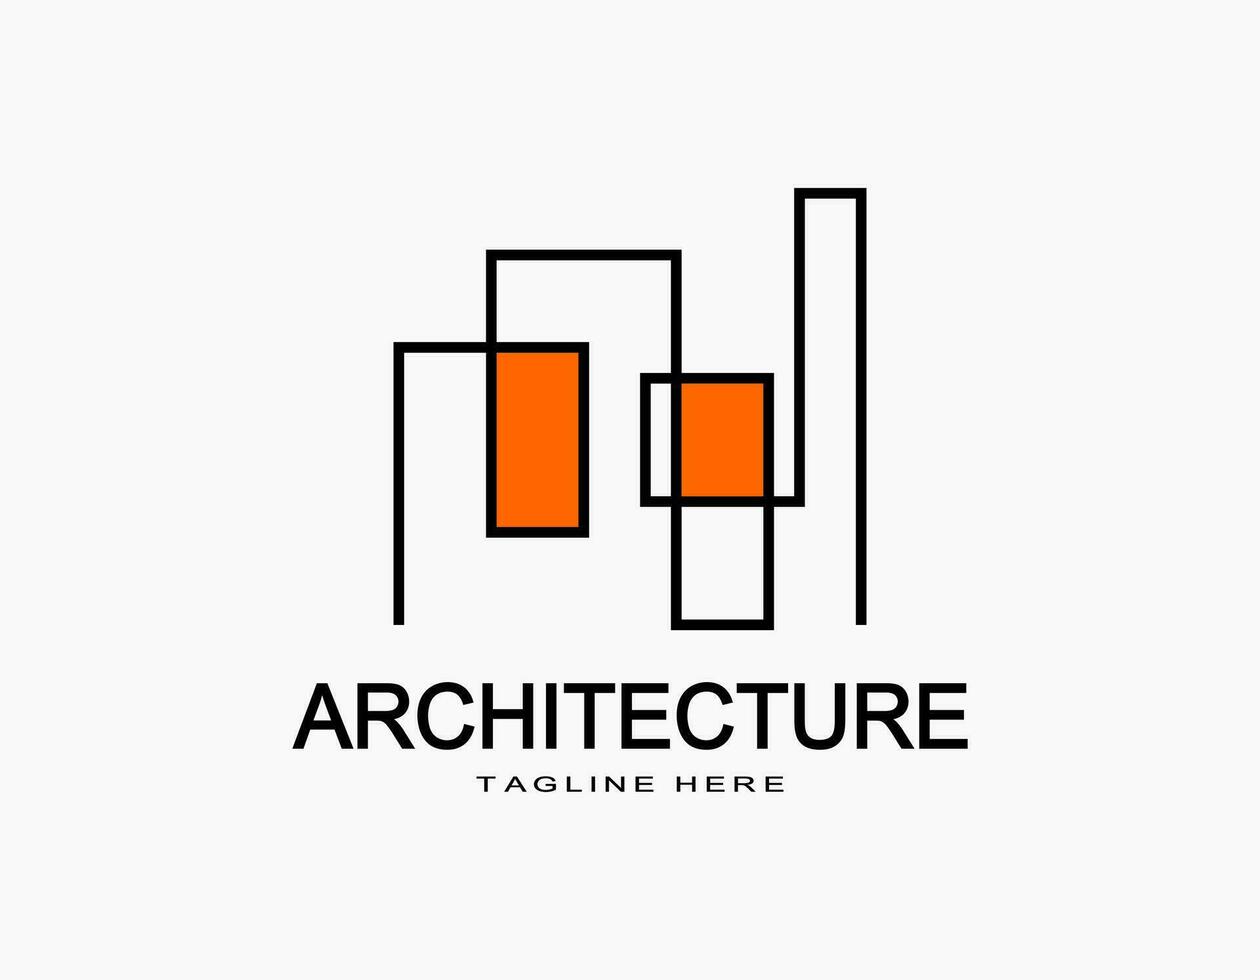 Architecture abstract logo in orange. Simple vector with lines that form a building or apartment. Design for company, architecture, developer, residence.